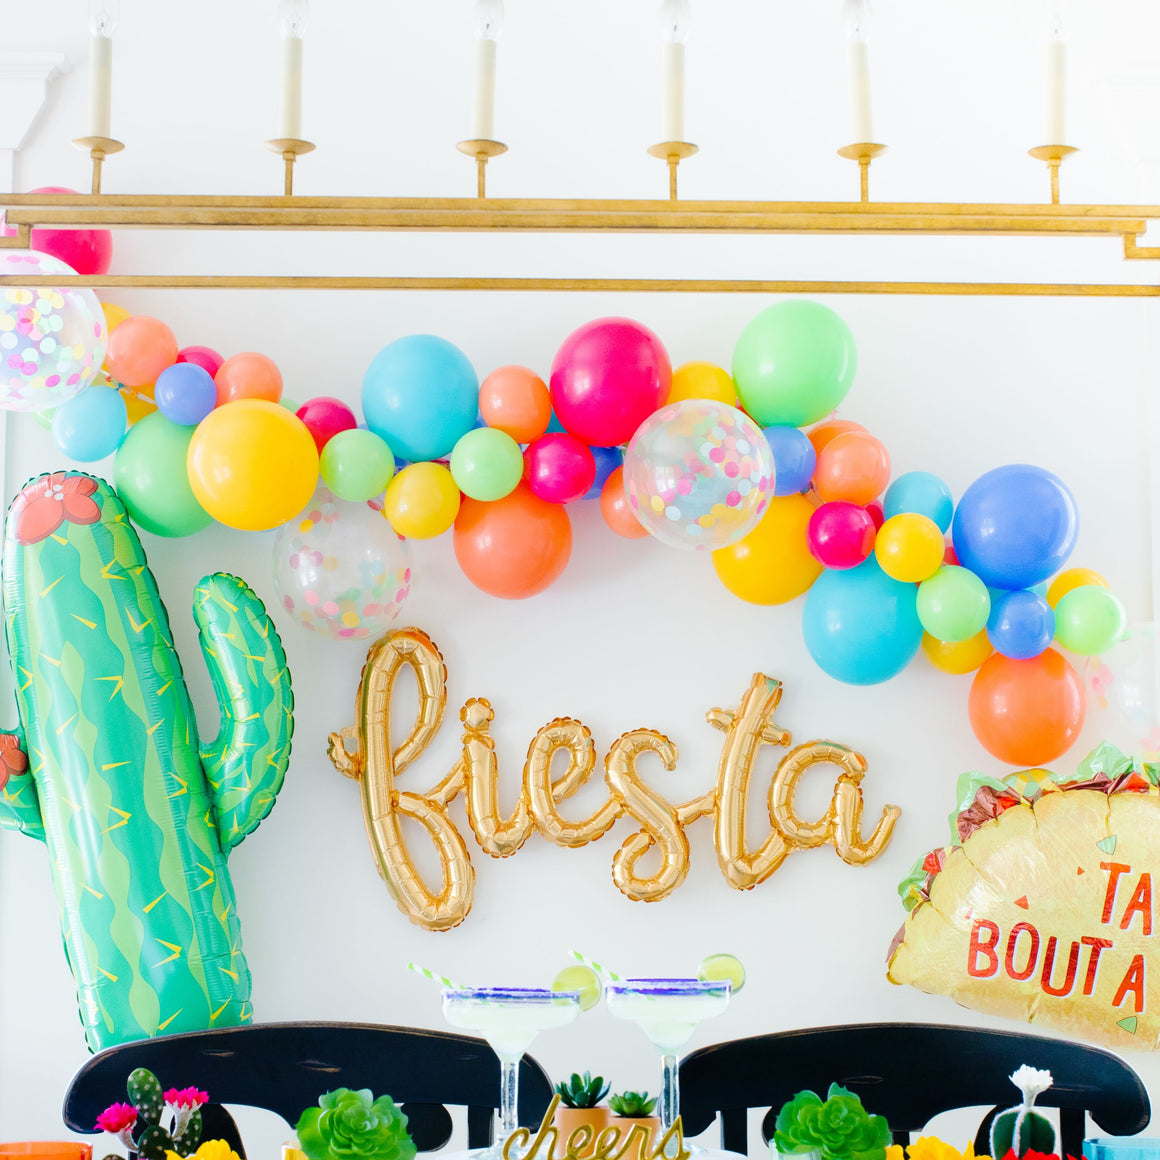 A gold cursive fiesta script balloon is strung on a wall surrounded by a colorful fiesta style balloon garland, a giant cactus balloon, and a taco balloon.